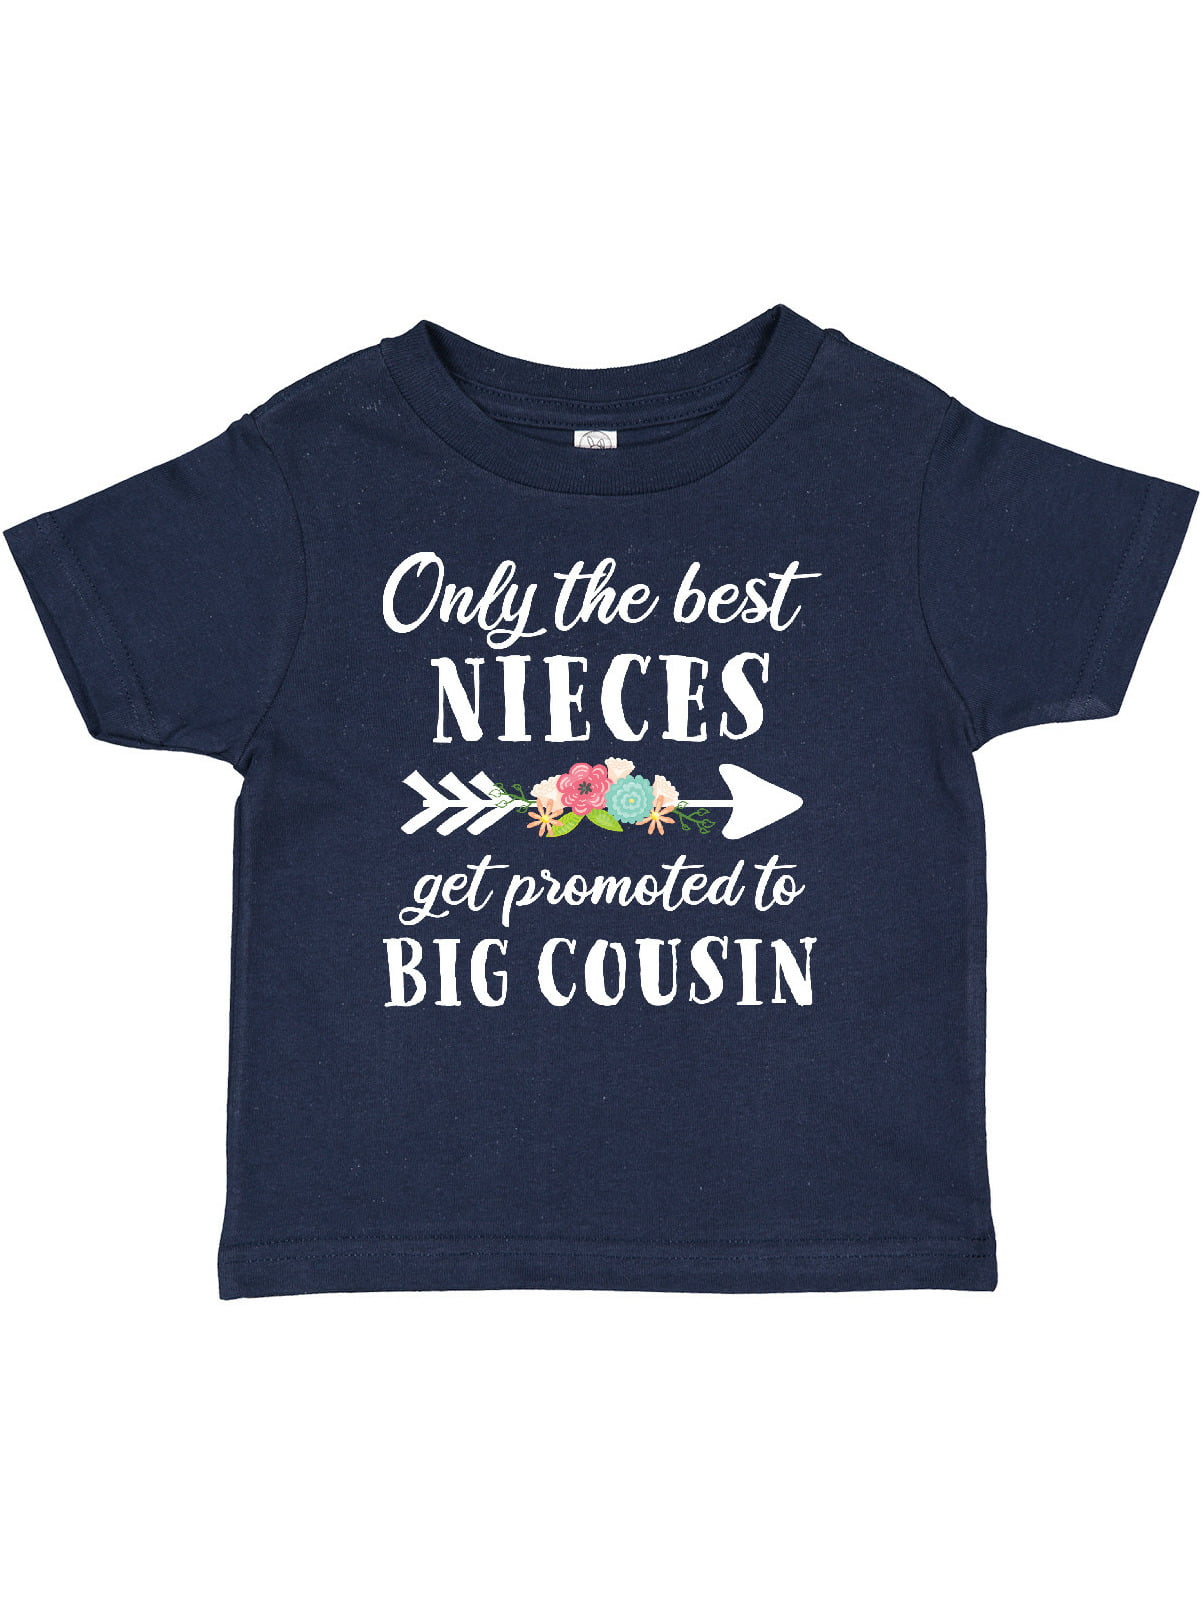 Promoted To Cousin kids short sleeve t-shirt 